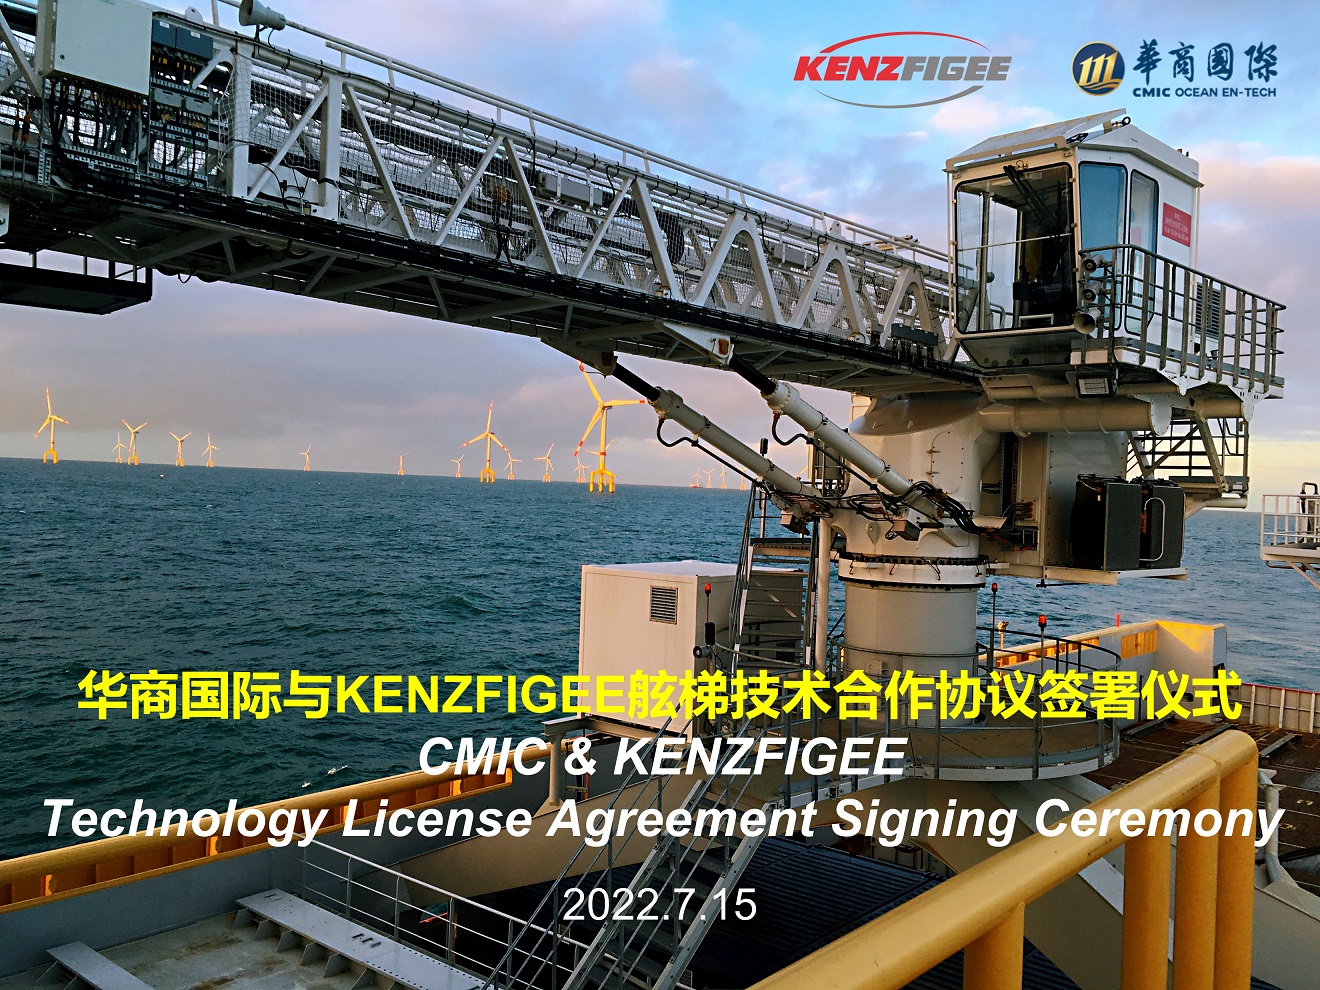 CMIC Gangway license agreement signing